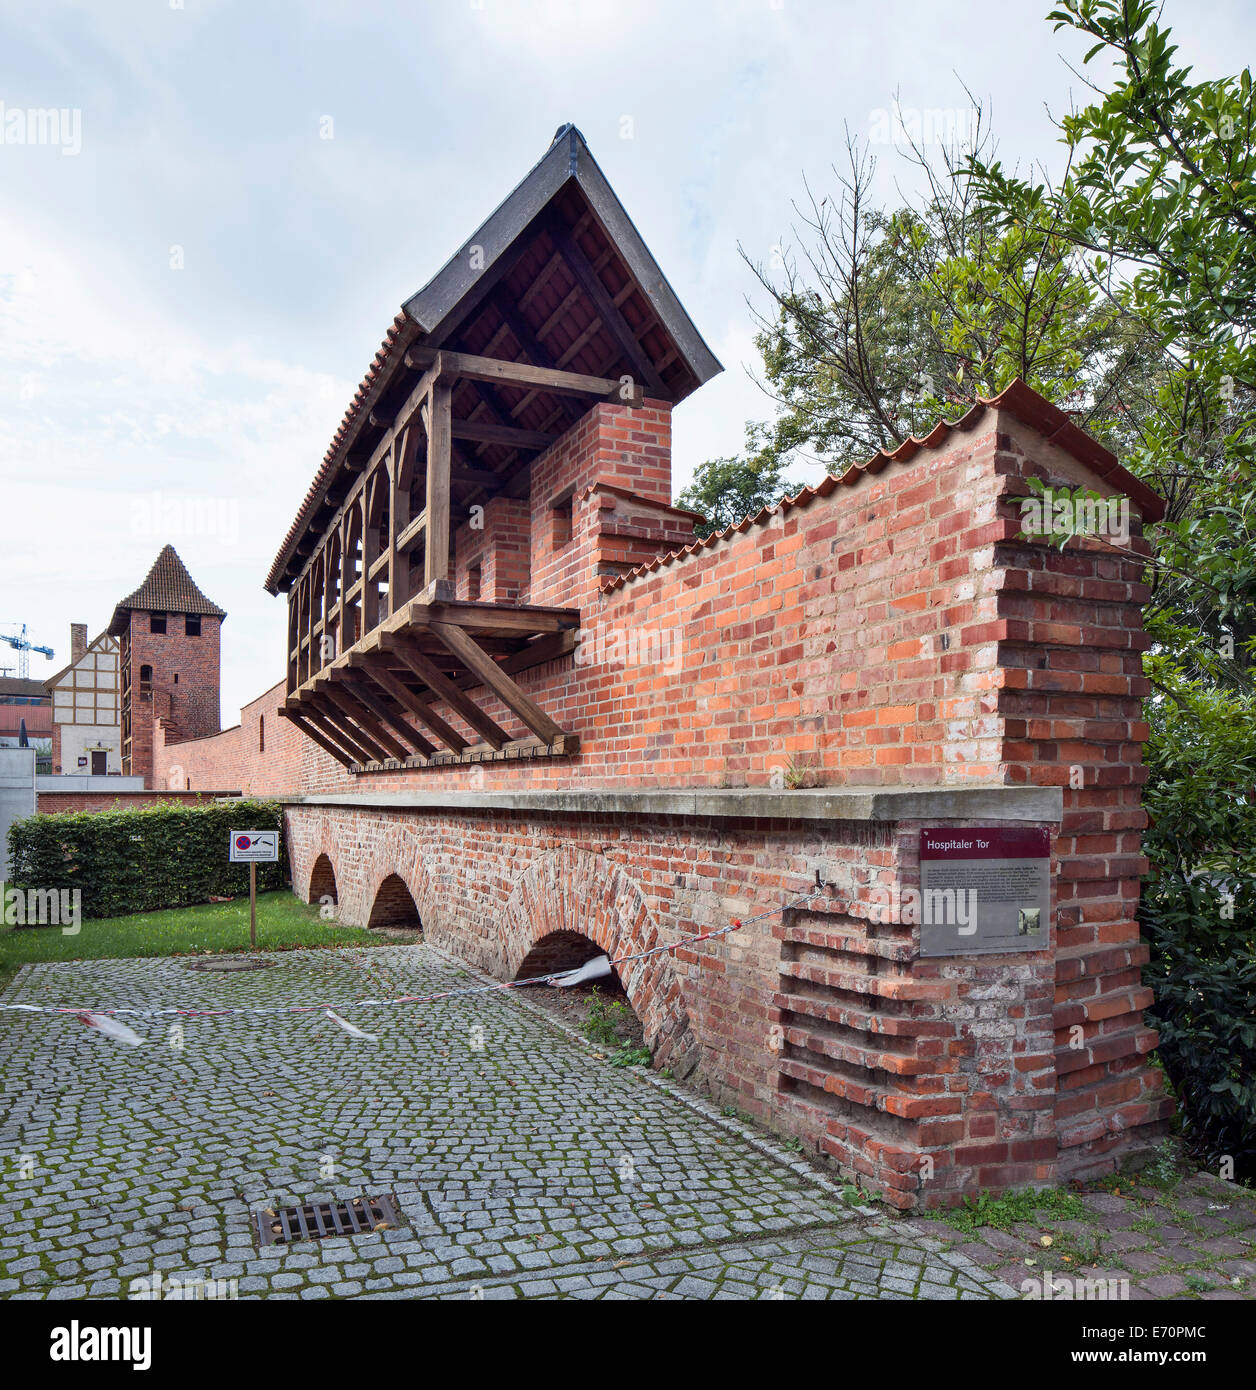 Remains of the medieval city walls with battlements at Hospitaler Tor, city gate, Stralsund, Mecklenburg-Western Pomerania Stock Photo